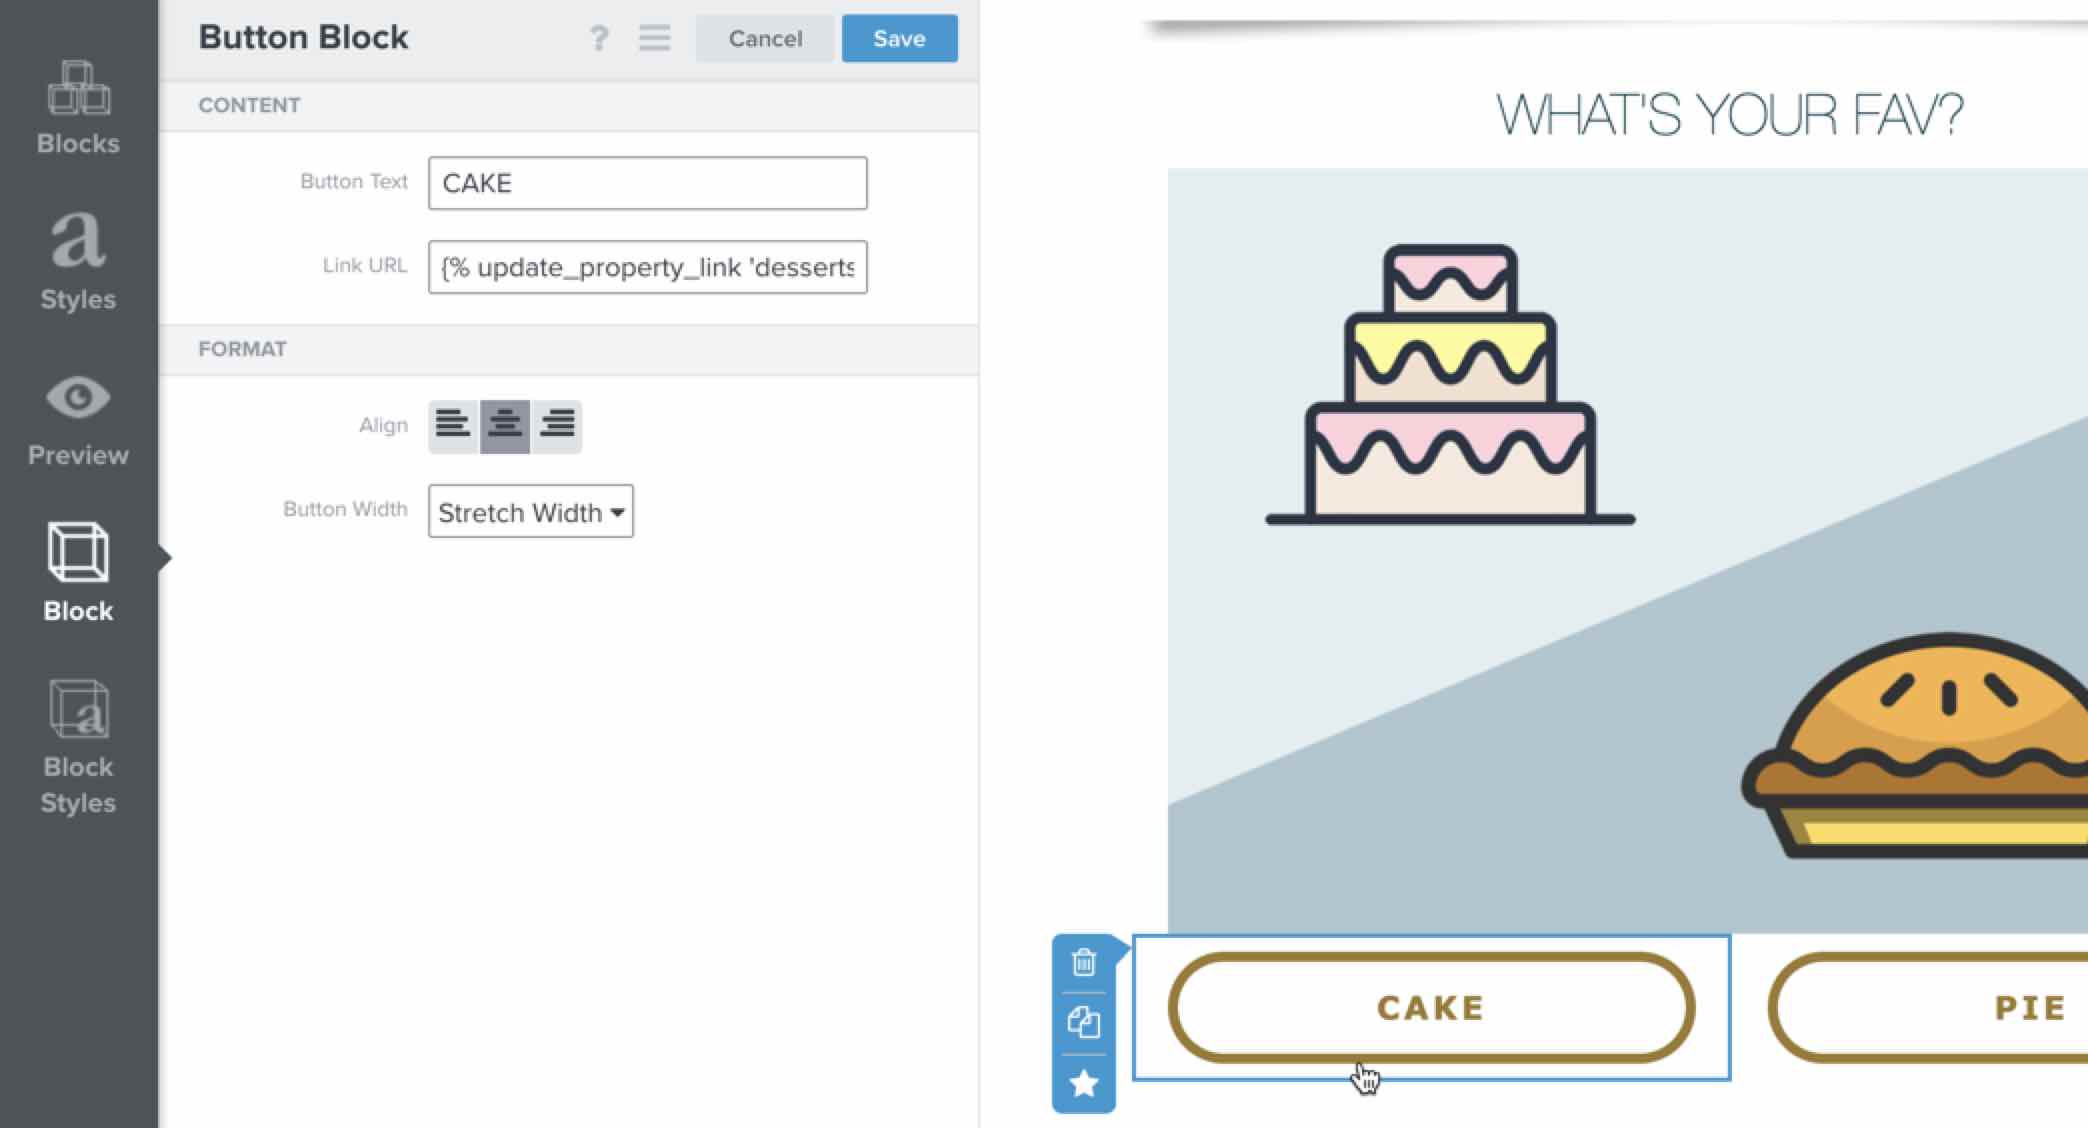 In Klaviyo's template editor, a Cake button uses the update profile property code in the URL field